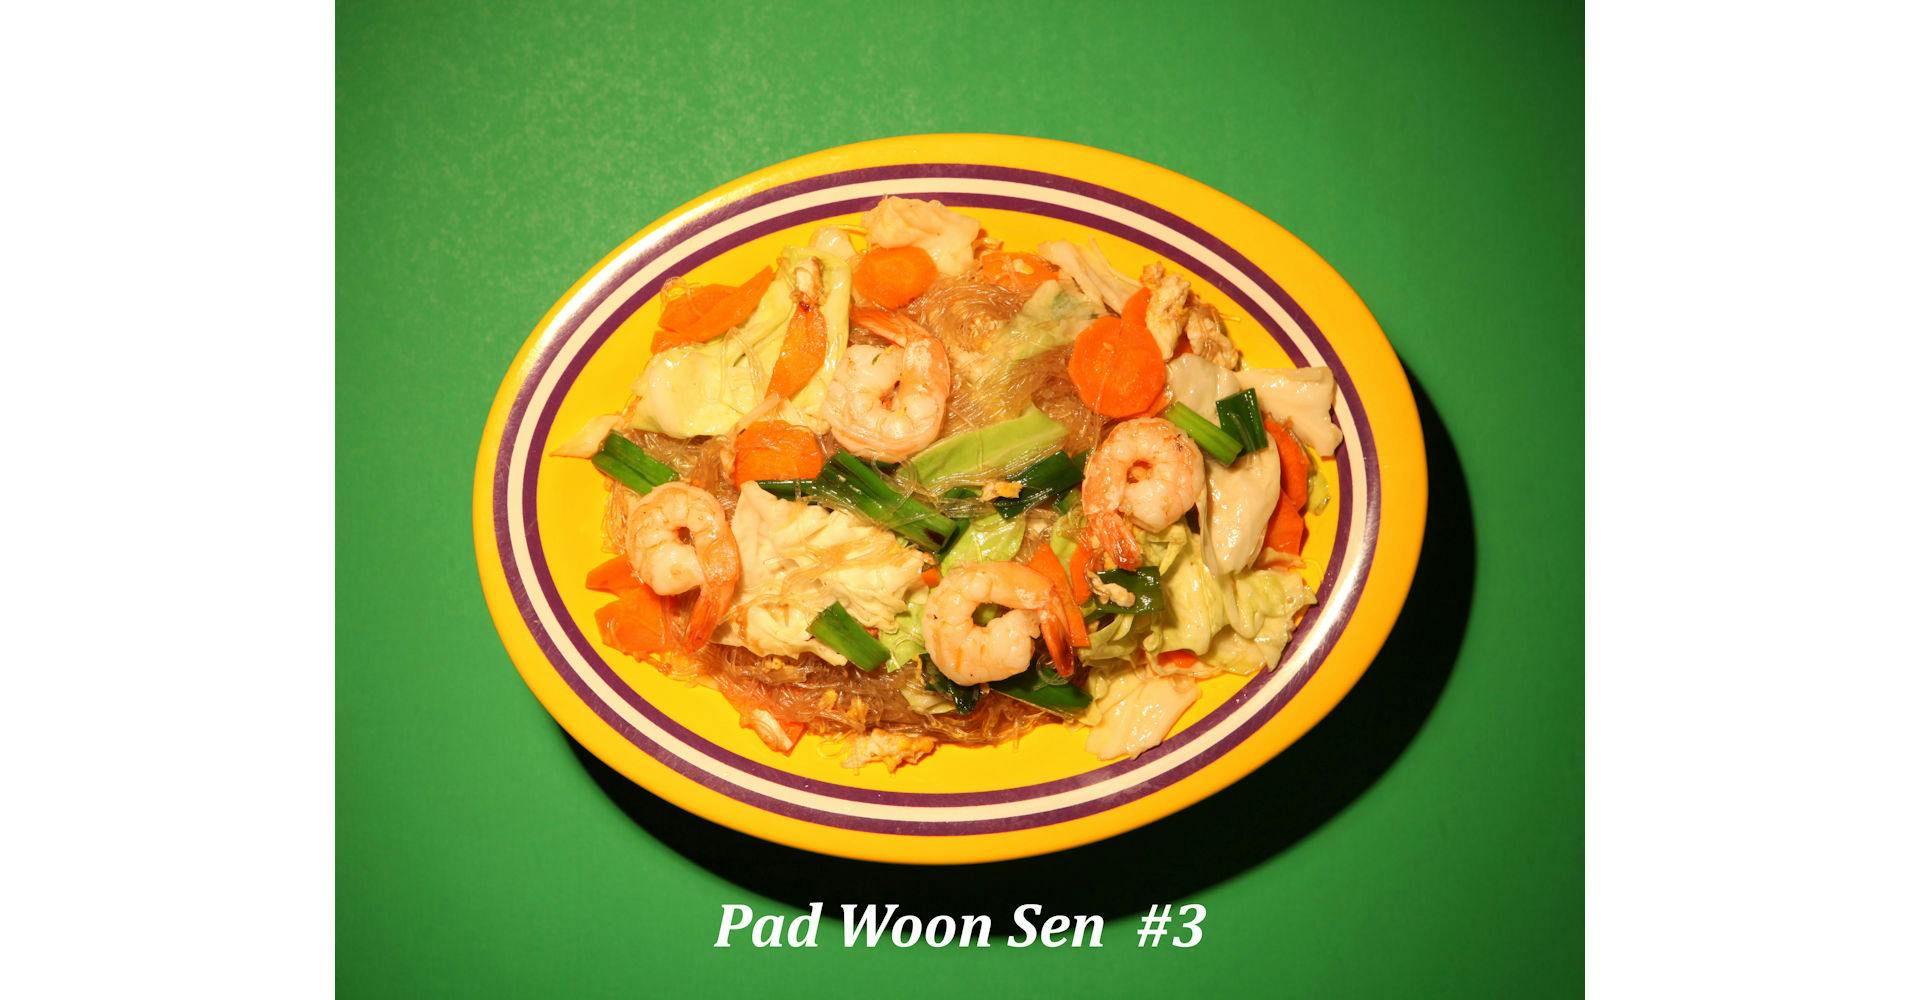 3. Pad Woon Sen from Narin's Thai Kitchen in Green Bay, WI